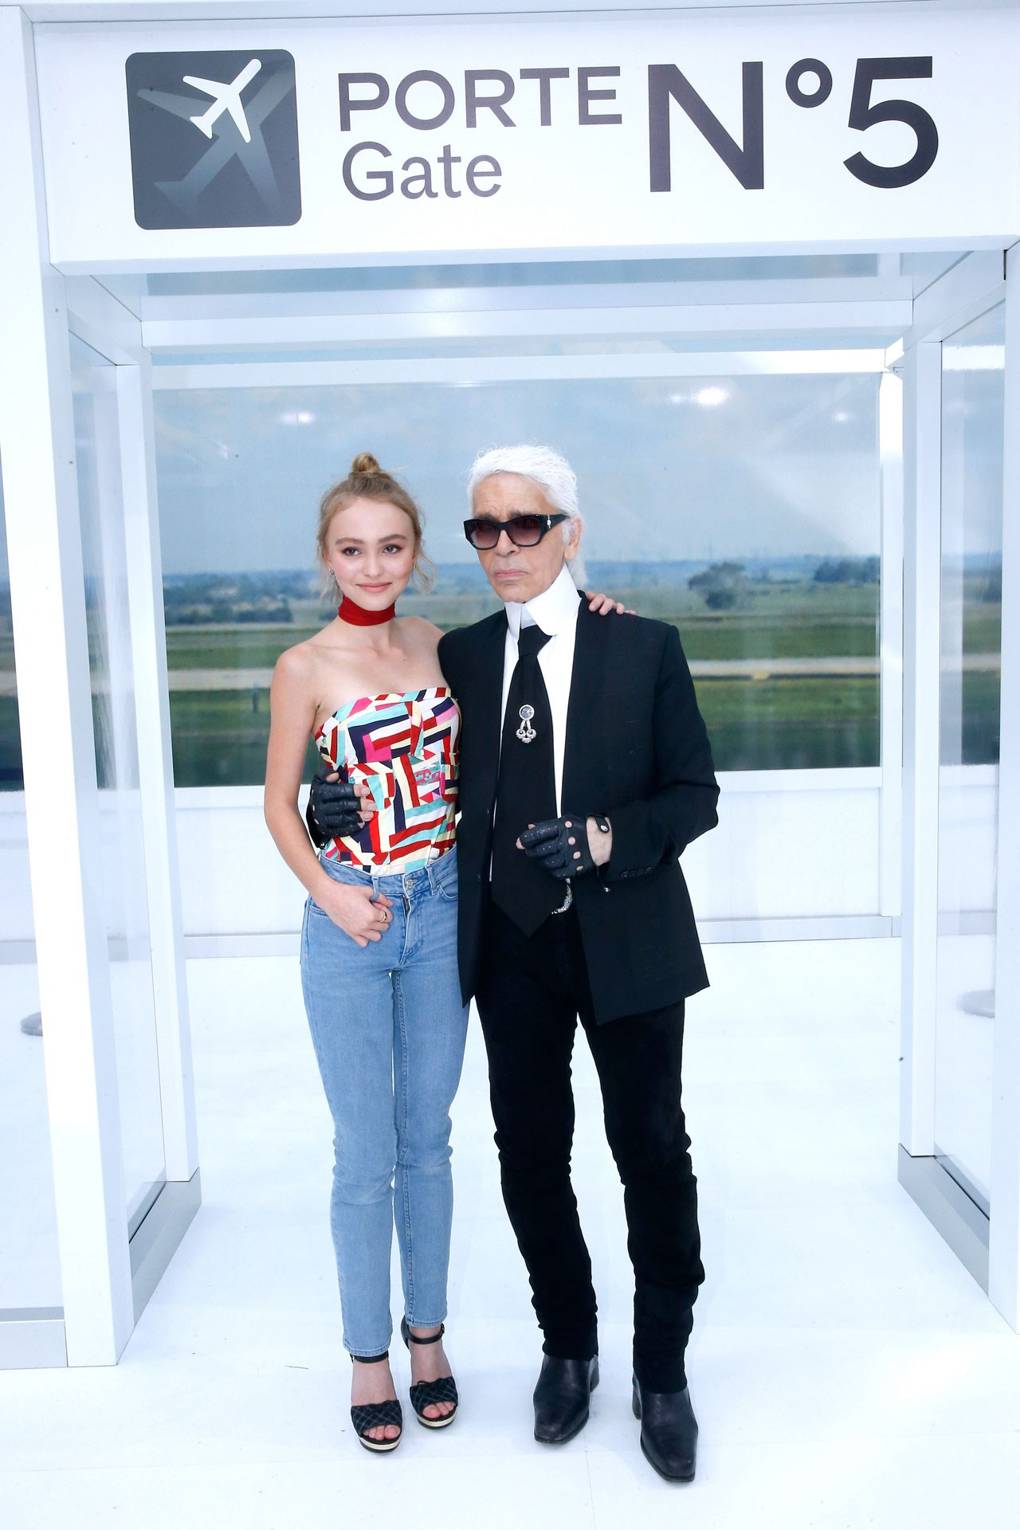 karl-lagerfeld-aw16-lily-rose-depp-2015-vogue-11may16-getty_b